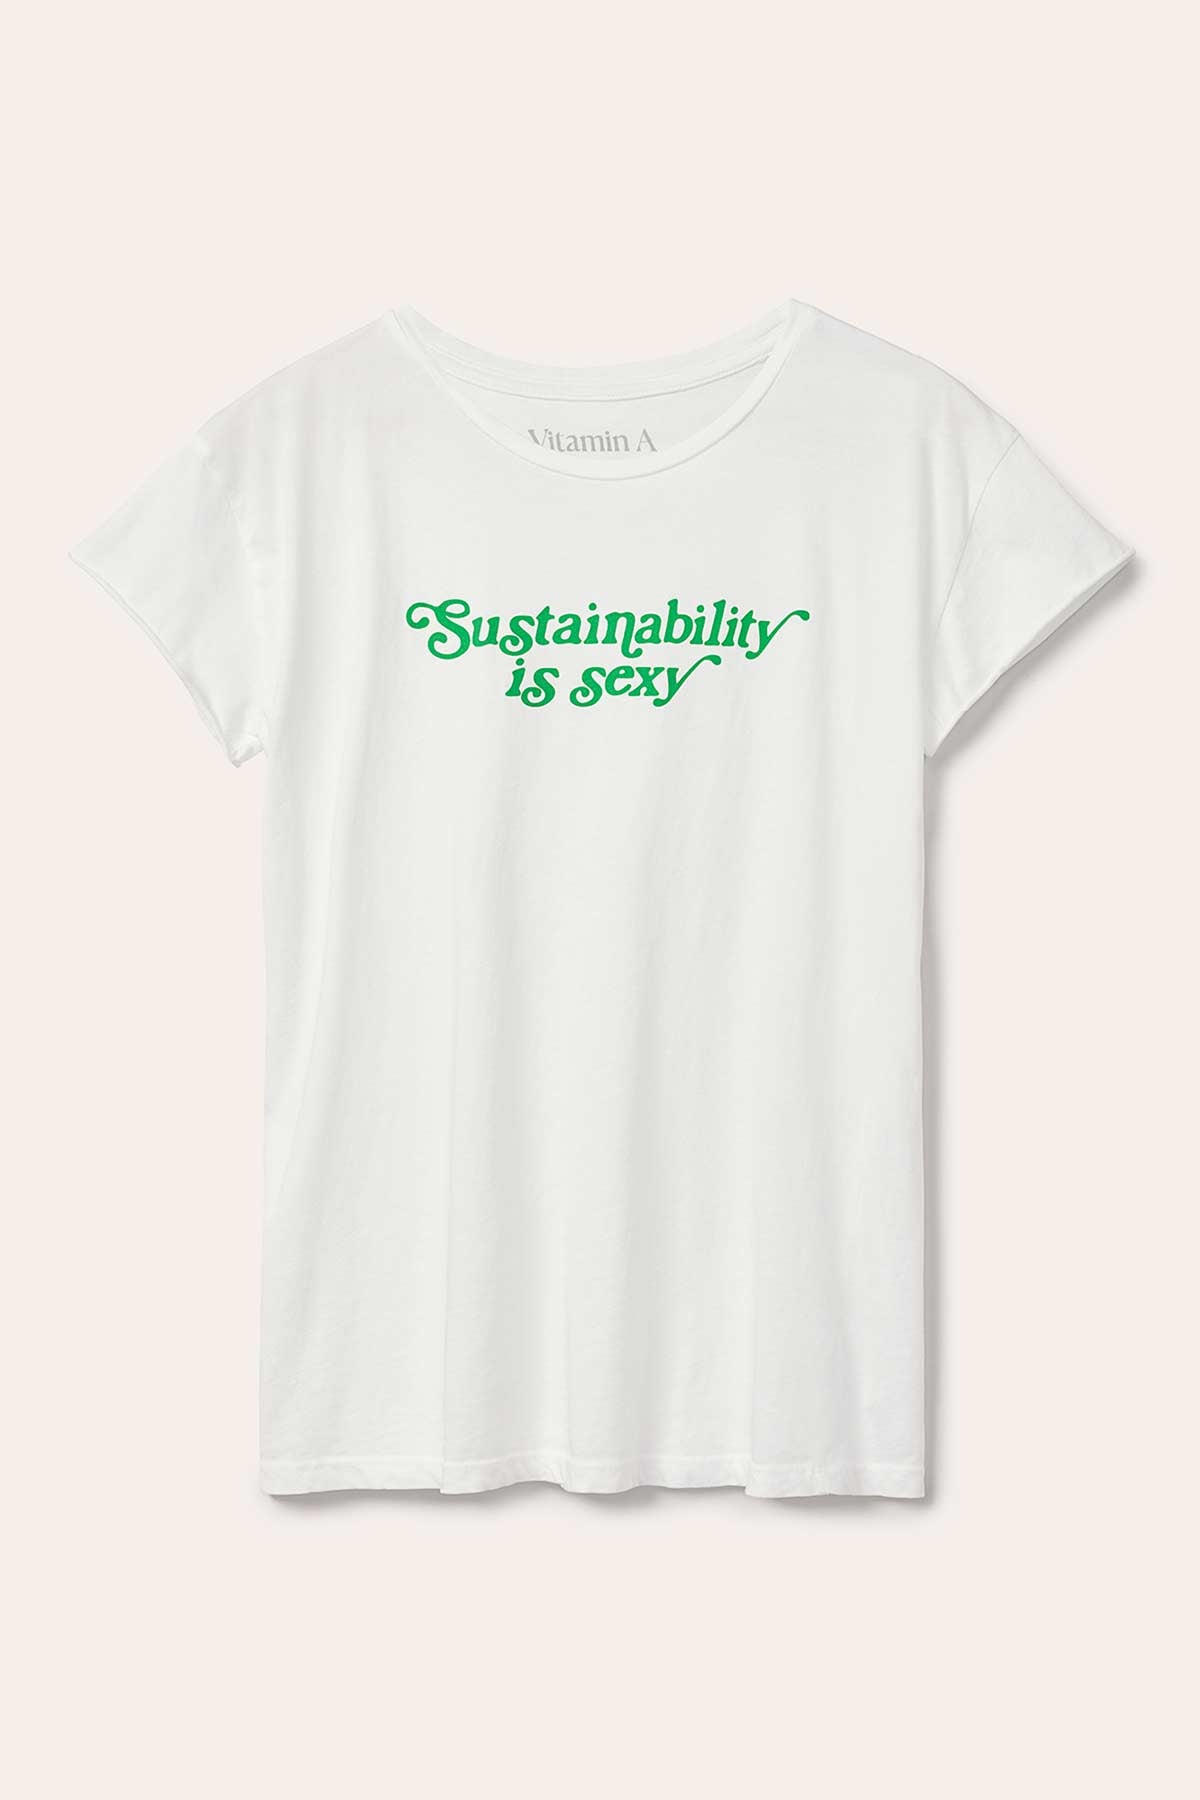 Vitamin A Graphic Tee Sustainability Is Sexy Organic Cotton